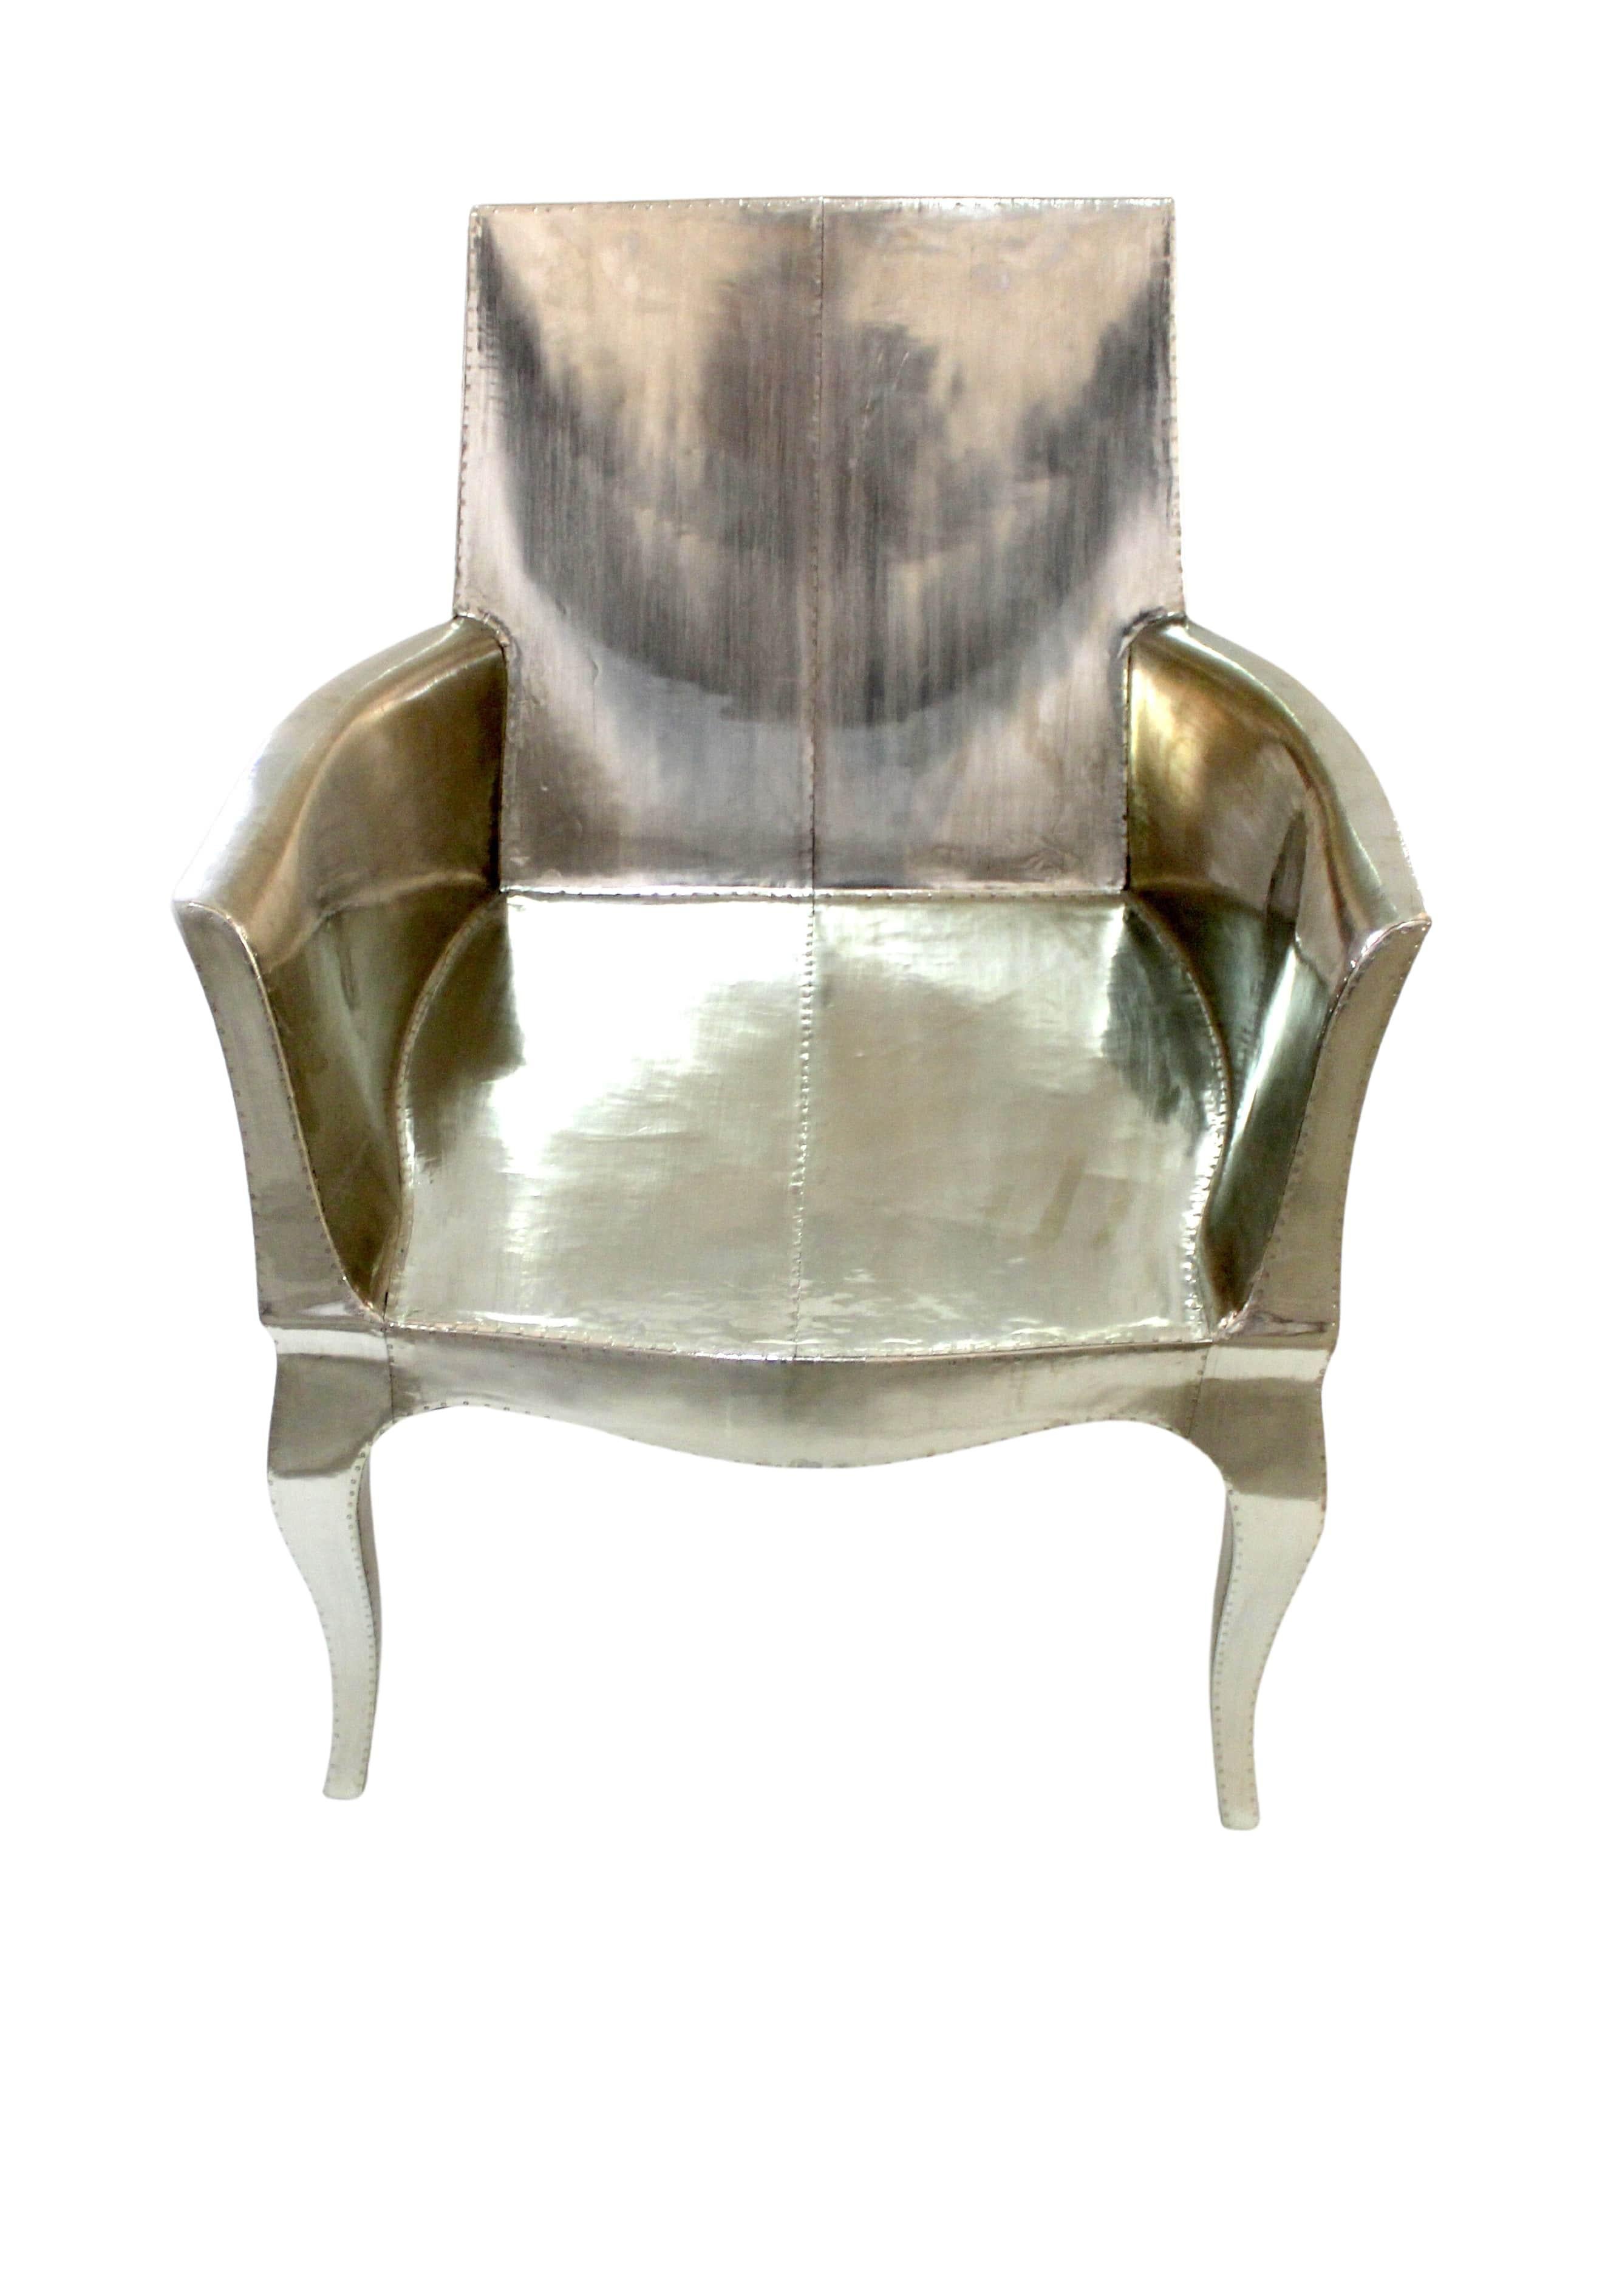 Indian Art Deco Accent Chair Pair Designed by Paul Mathieu for Stephanie Odegard For Sale